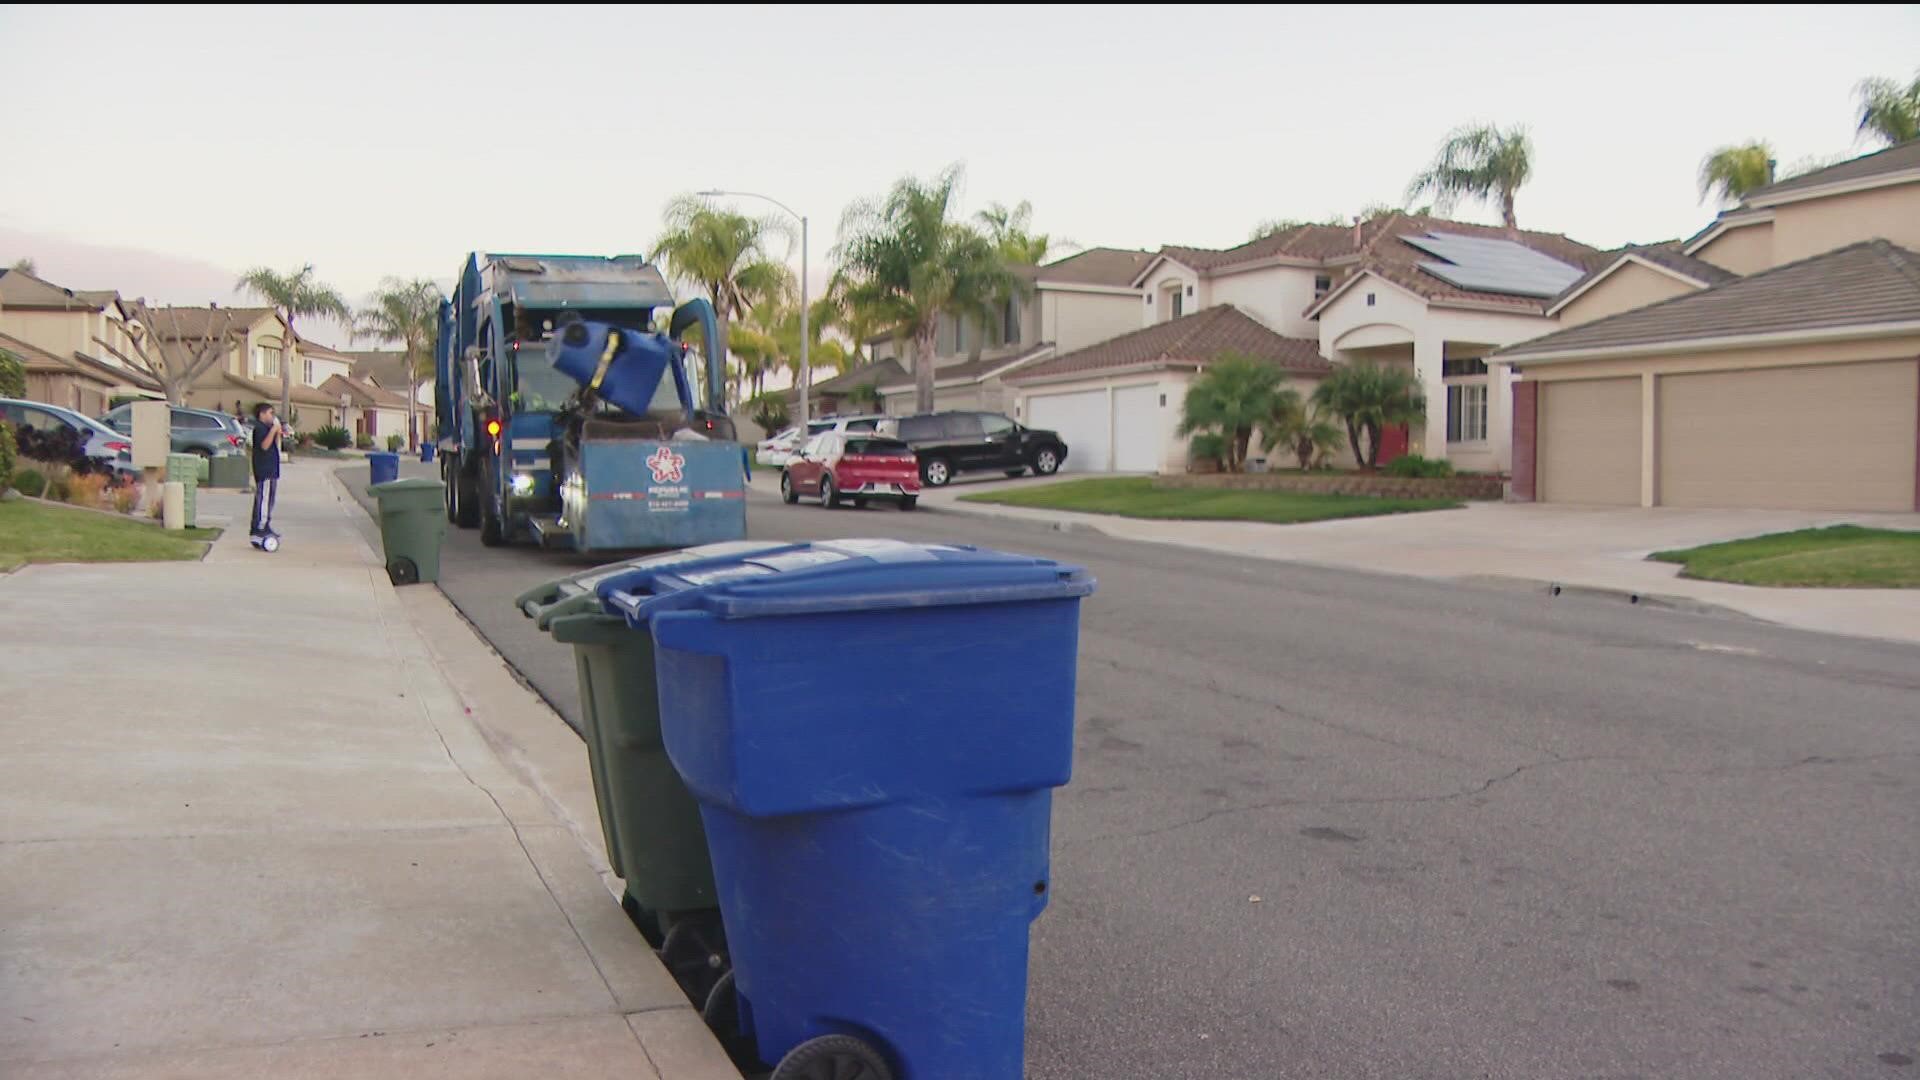 Voters will decide whether to change a 100-year-old law requiring the city to pick-up trash for free at single-family homes.